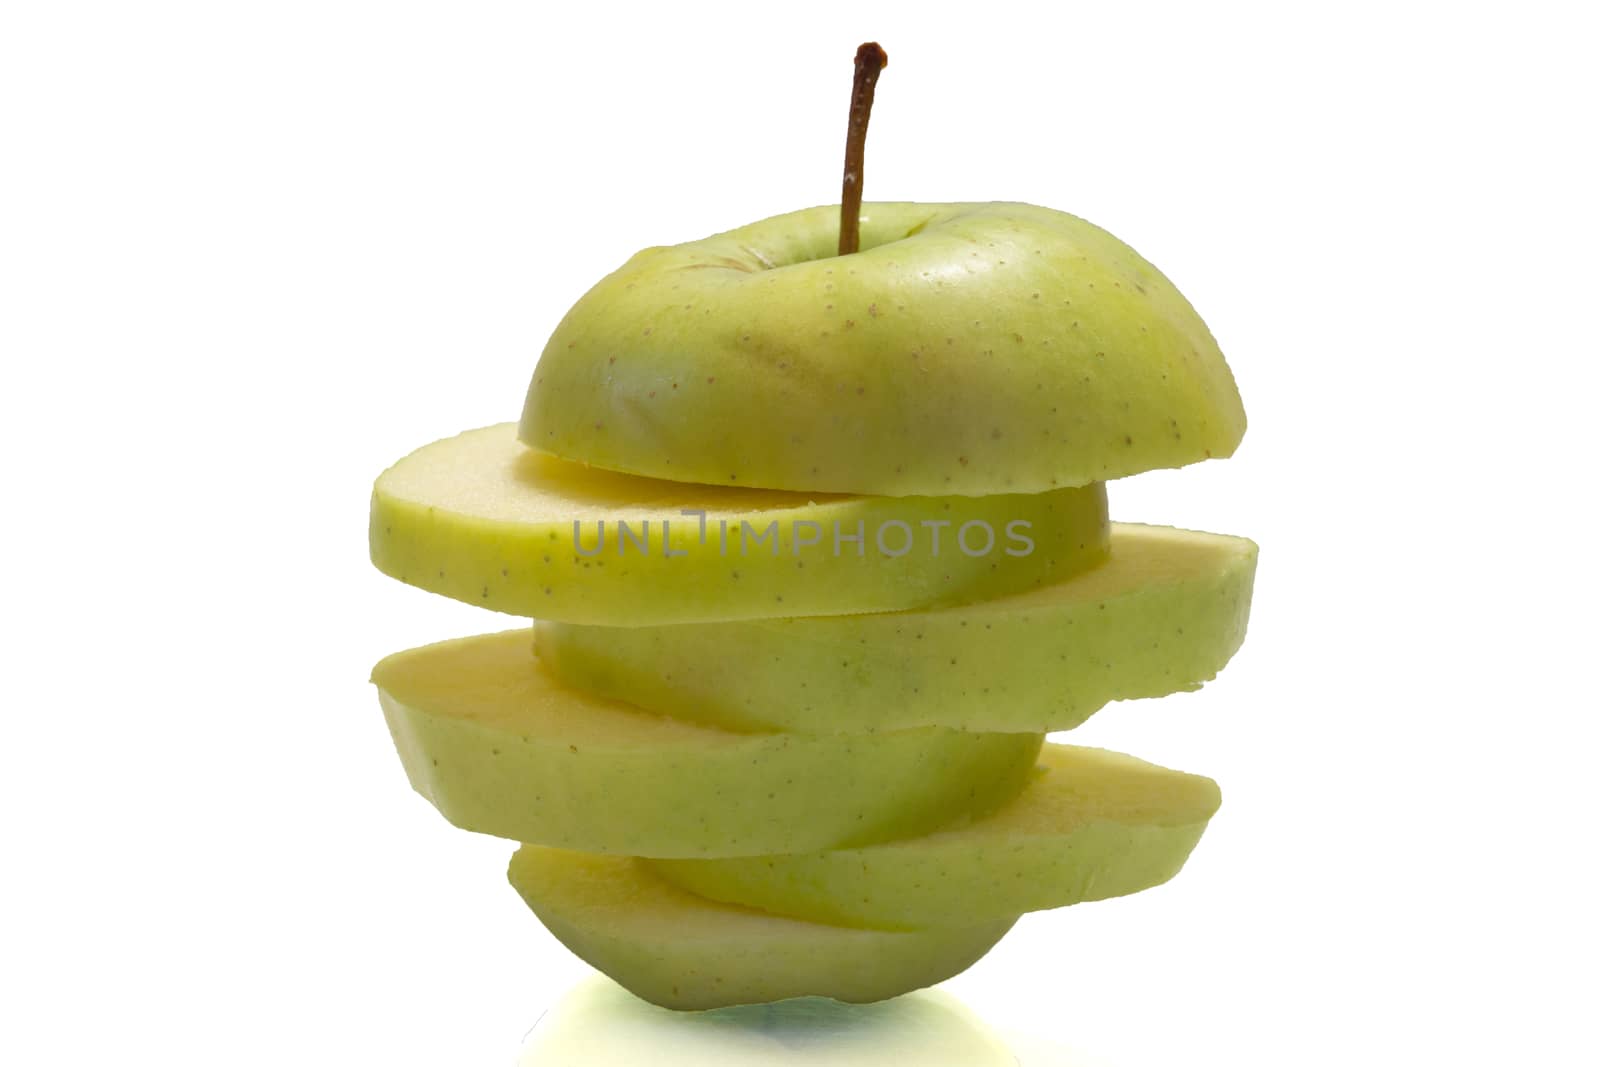 The photo shows an apple on a white background